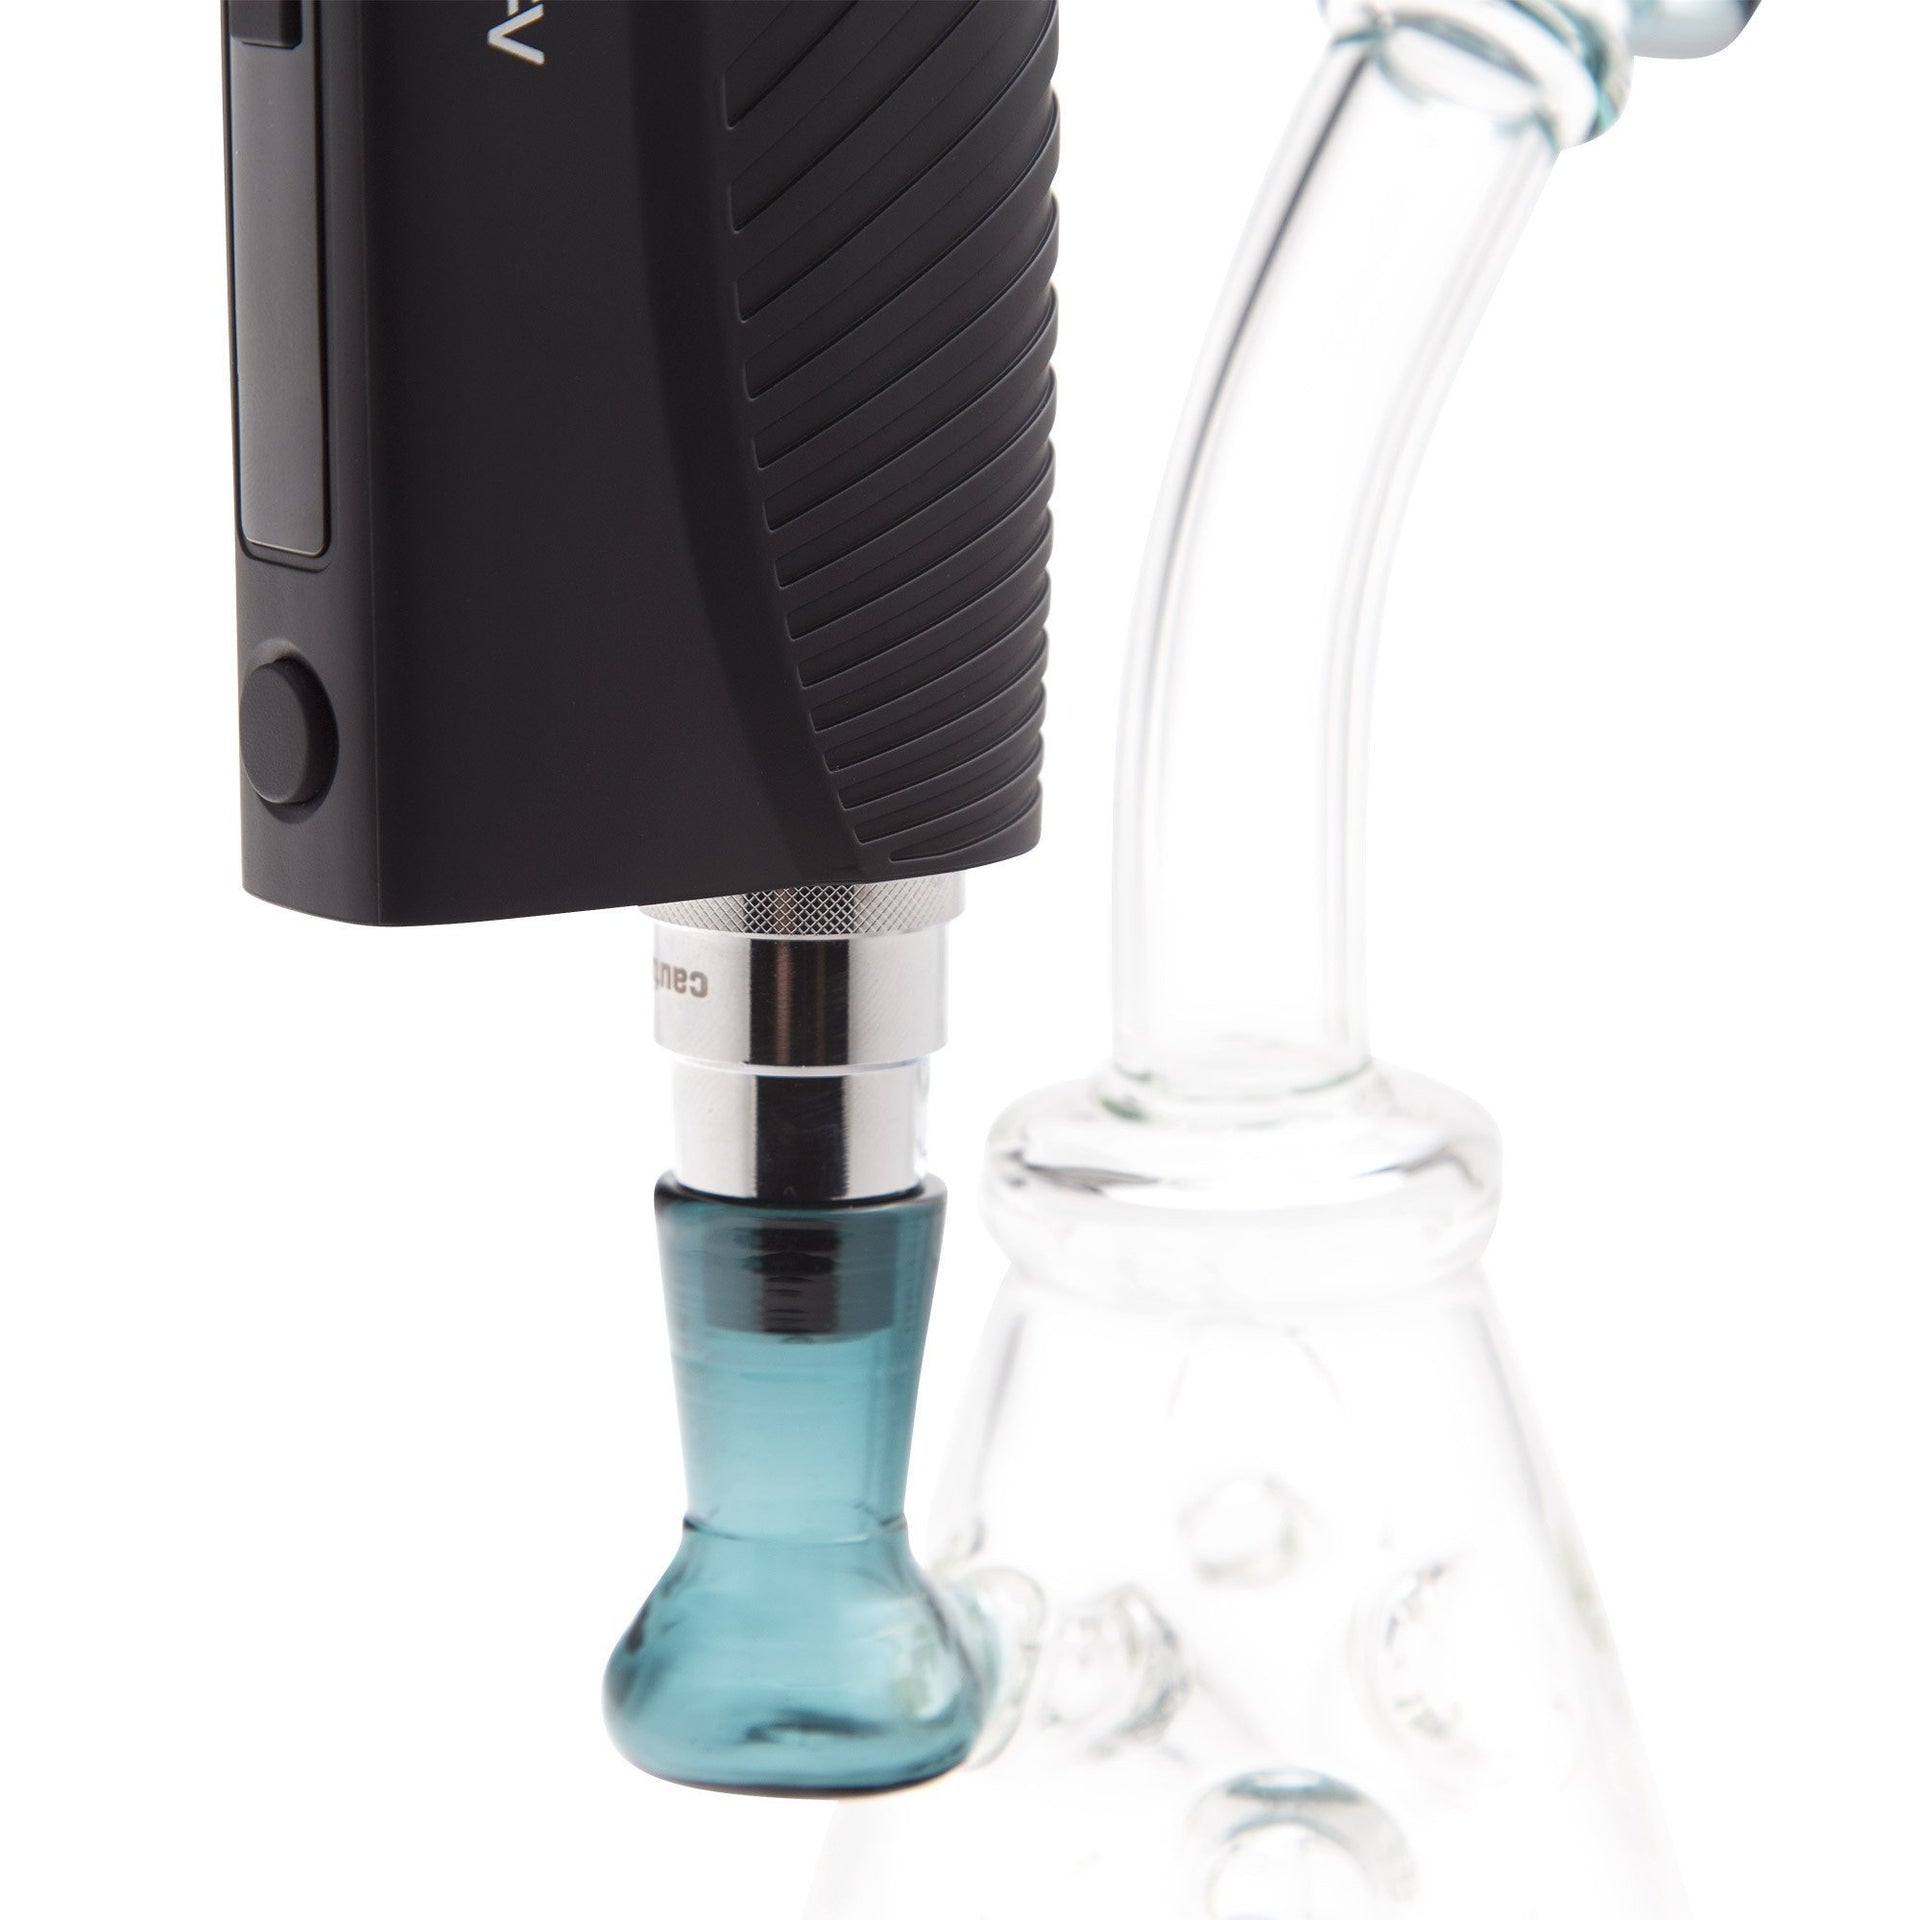 Boundless Waterpipe Adapter - 420 Science - The most trusted online smoke shop.